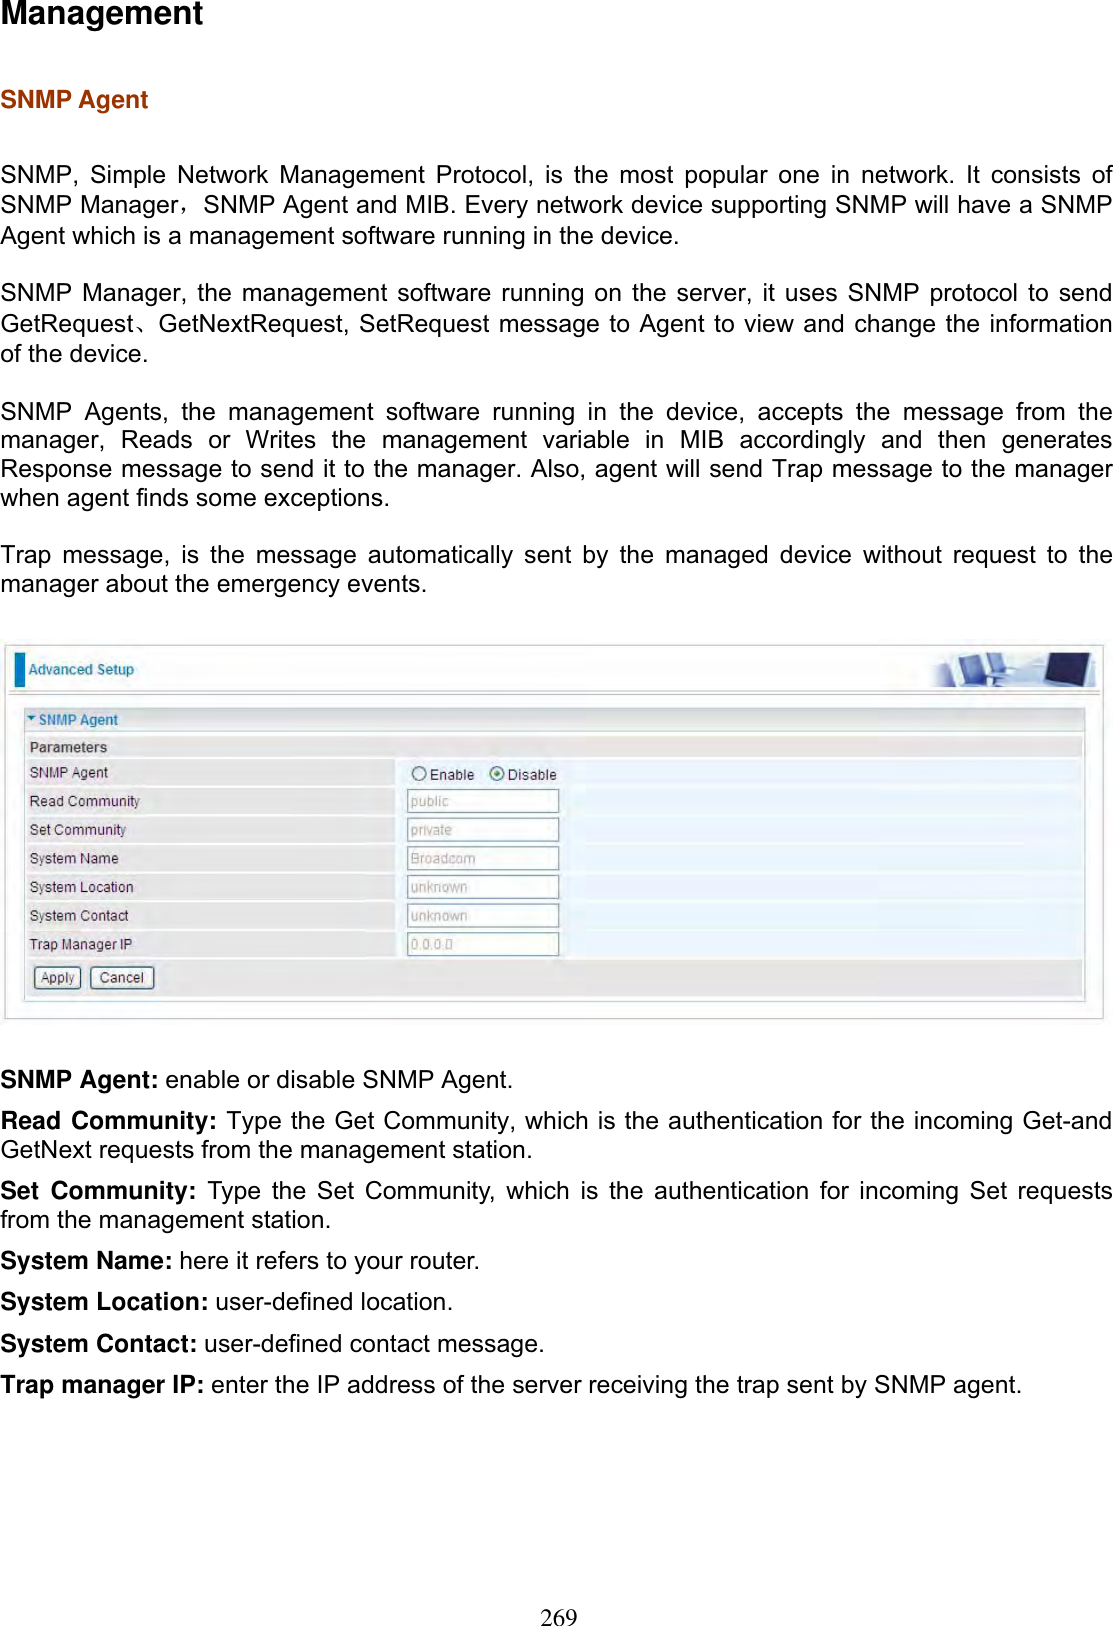 269ManagementSNMP Agent  SNMP, Simple Network Management Protocol, is the most popular one in network. It consists of SNMP ManagerˈSNMP Agent and MIB. Every network device supporting SNMP will have a SNMP Agent which is a management software running in the device.  SNMP Manager, the management software running on the server, it uses SNMP protocol to send GetRequestǃGetNextRequest, SetRequest message to Agent to view and change the information of the device. SNMP Agents, the management software running in the device, accepts the message from the manager, Reads or Writes the management variable in MIB accordingly and then generates Response message to send it to the manager. Also, agent will send Trap message to the manager when agent finds some exceptions.Trap message, is the message automatically sent by the managed device without request to the manager about the emergency events. SNMP Agent: enable or disable SNMP Agent.Read Community: Type the Get Community, which is the authentication for the incoming Get-and GetNext requests from the management station.Set Community: Type the Set Community, which is the authentication for incoming Set requests from the management station.  System Name: here it refers to your router. System Location: user-defined location. System Contact: user-defined contact message. Trap manager IP: enter the IP address of the server receiving the trap sent by SNMP agent. 